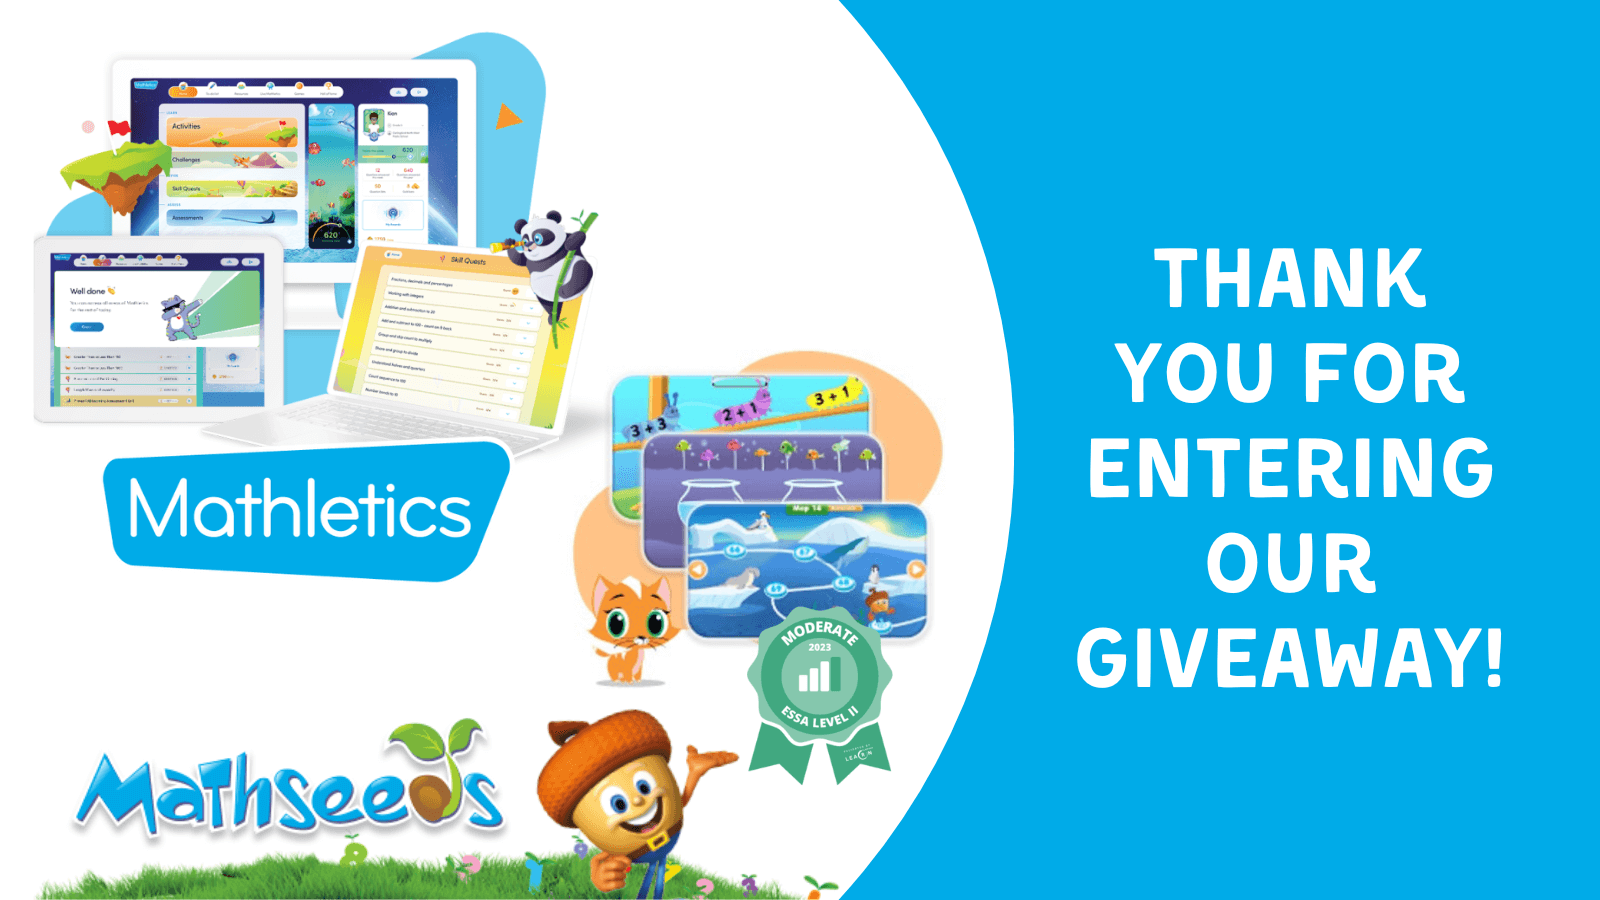 Thank you image for the Mathletics and Mathseeds giveaway